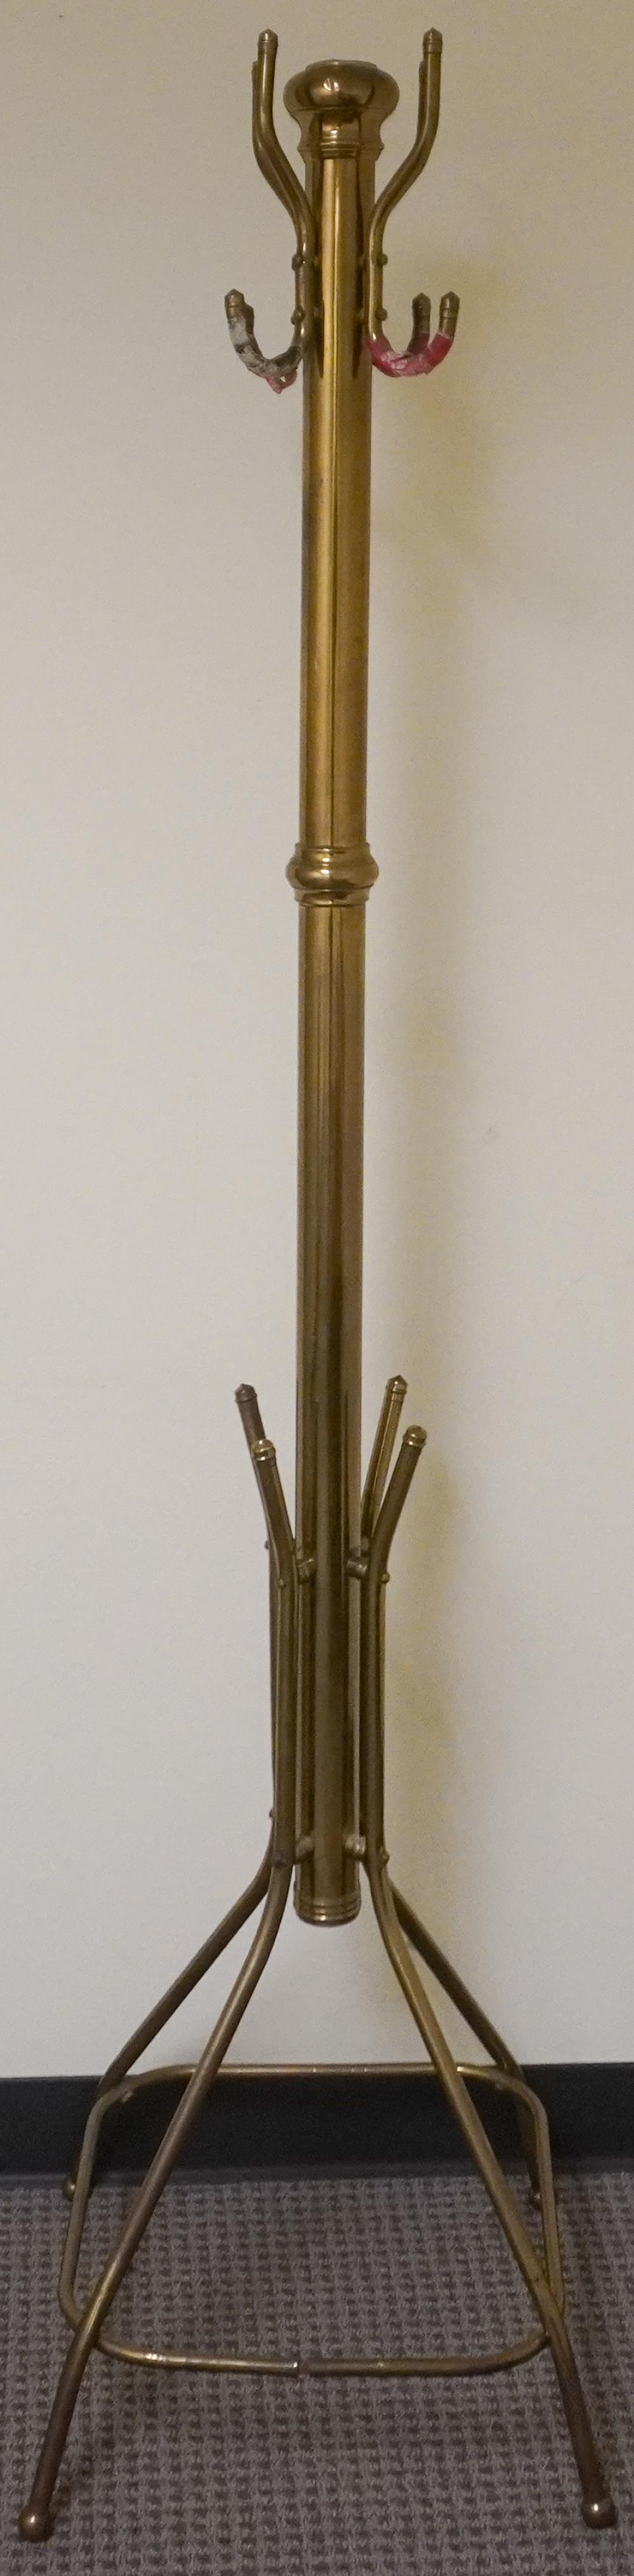 BRASS FINISH COAT AND HAT RACK  2e6bef